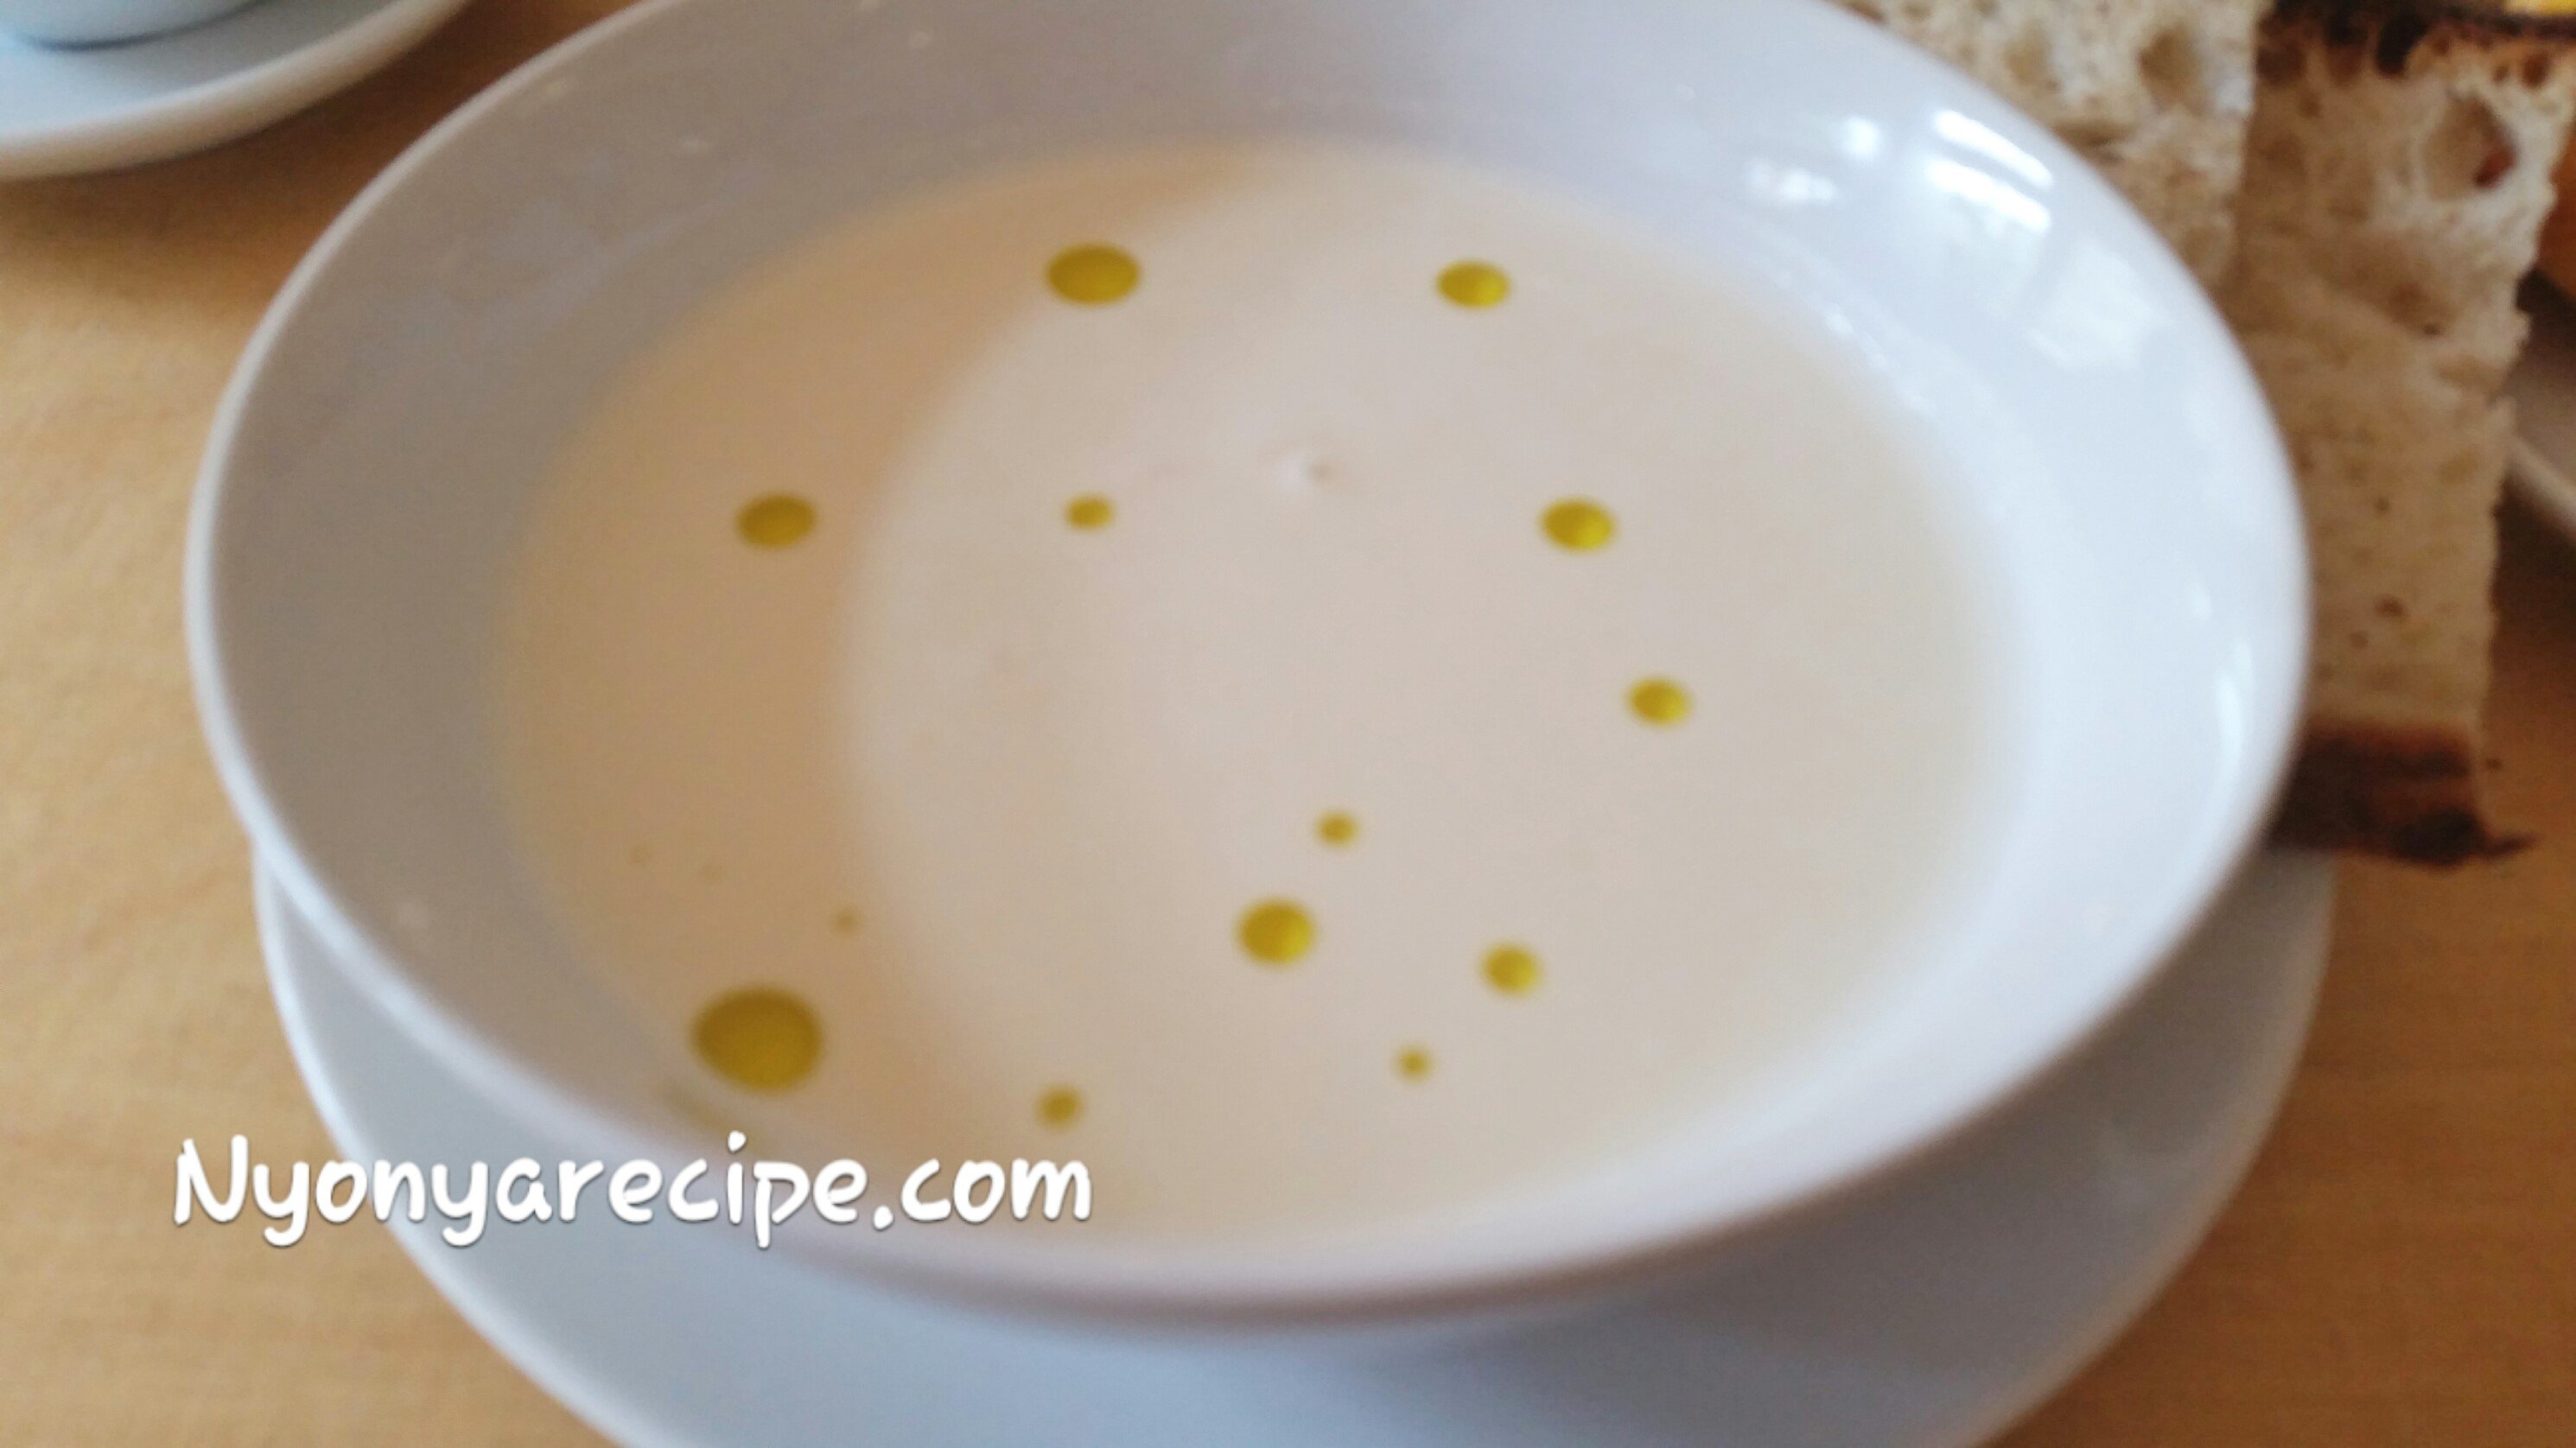 Ajo Blanco with droplets of olive oil on the top.